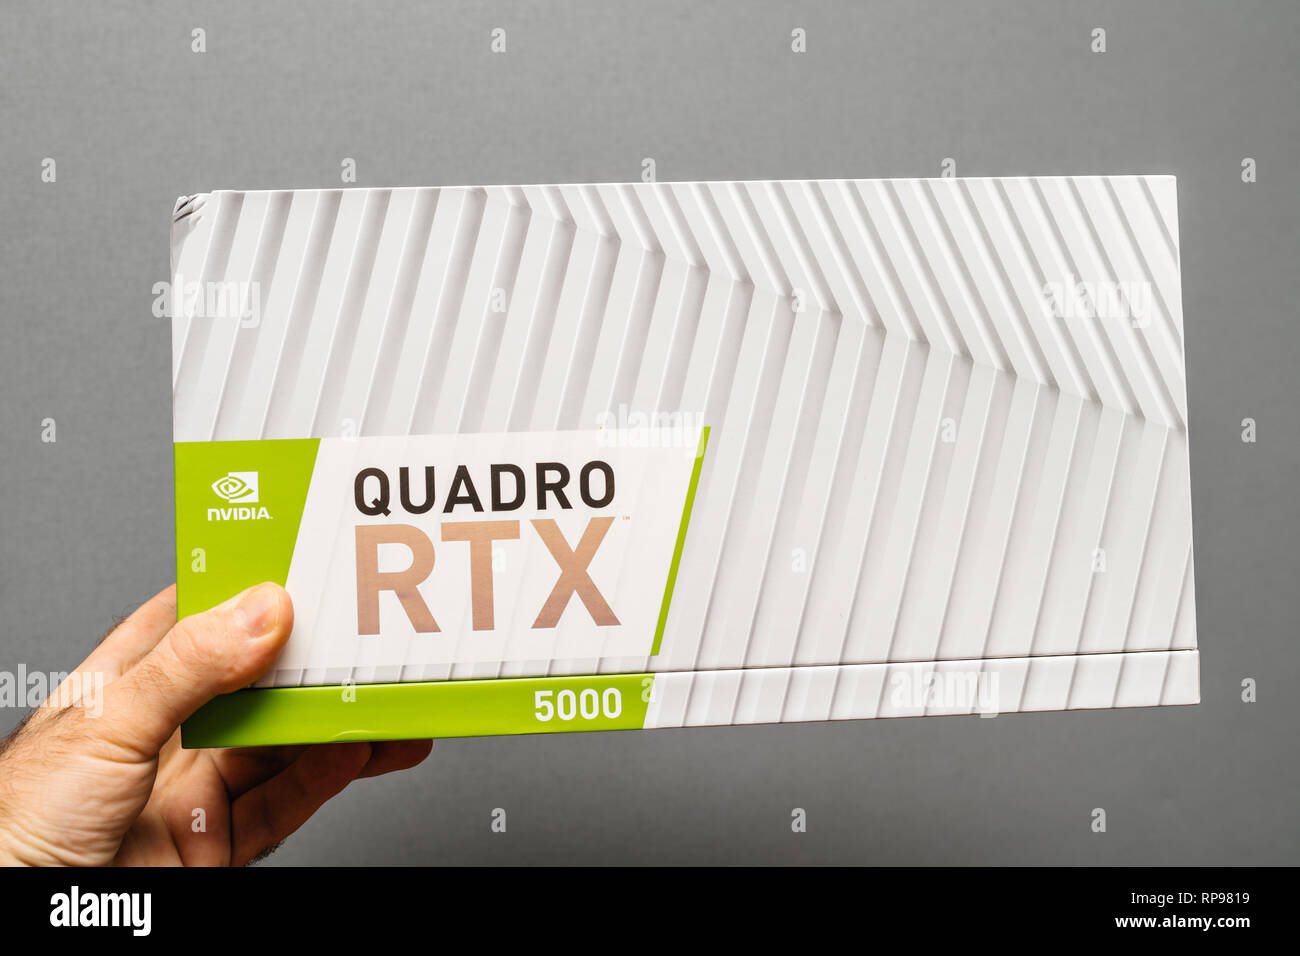 Paris, France - Feb 20, 2019: Man holding cardboard of latest Nvidia Quadro RTX 5000 workstation professional video card GPU for professional CAD CGI scientific machine learning front view Stock Photo